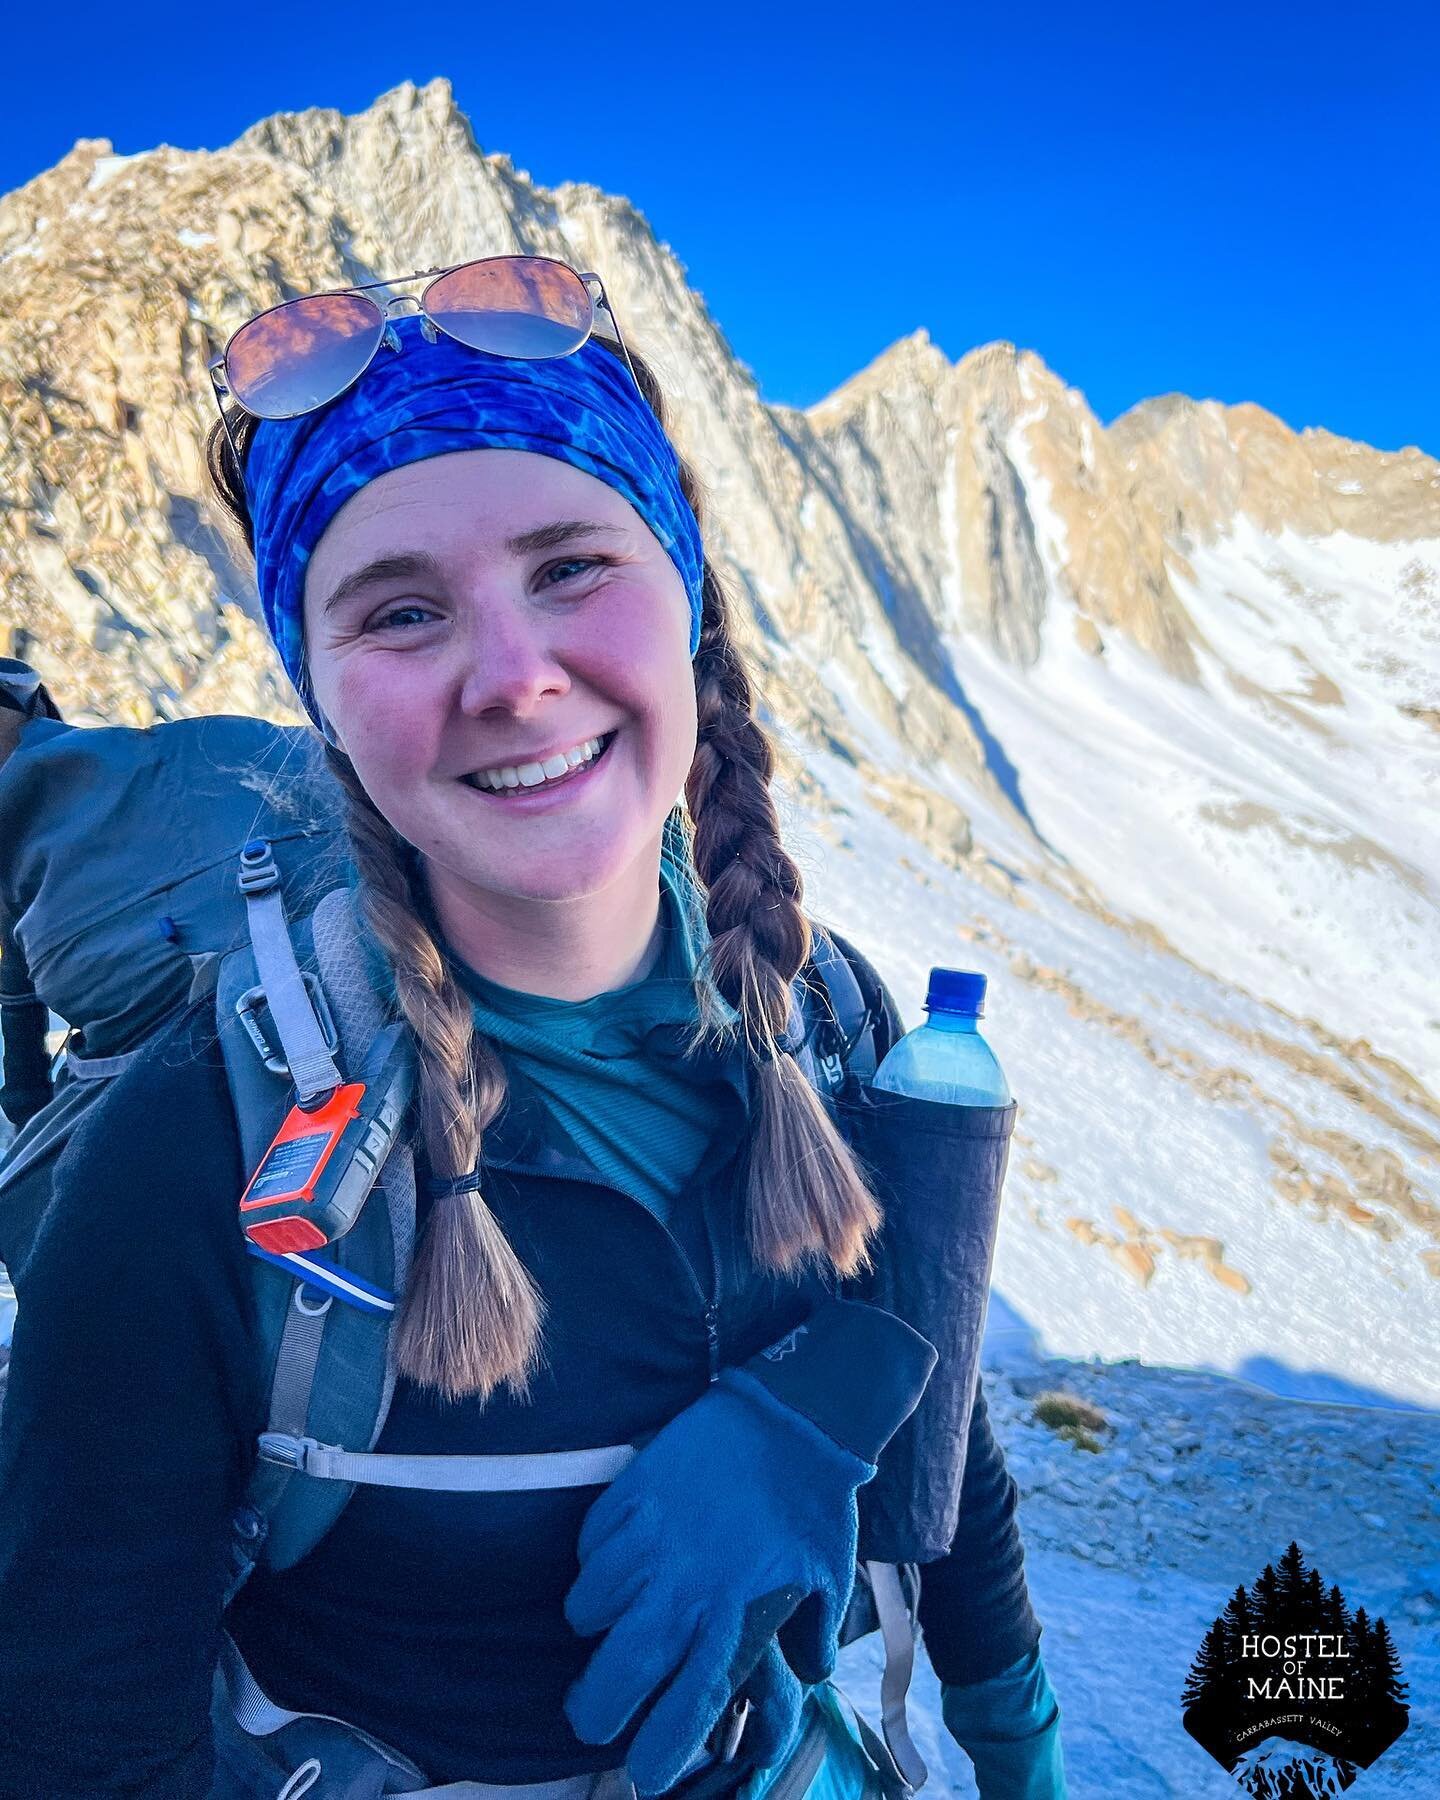 Today&rsquo;s HoME Spotlight is on one of our resident thru-hikers! Molly (aka Lava Girl)  joined the HoME team in the winter of 2022. Originally a music teacher, she traded the piano for a backpack and thru-hiked the Appalachian Trail. This led to a